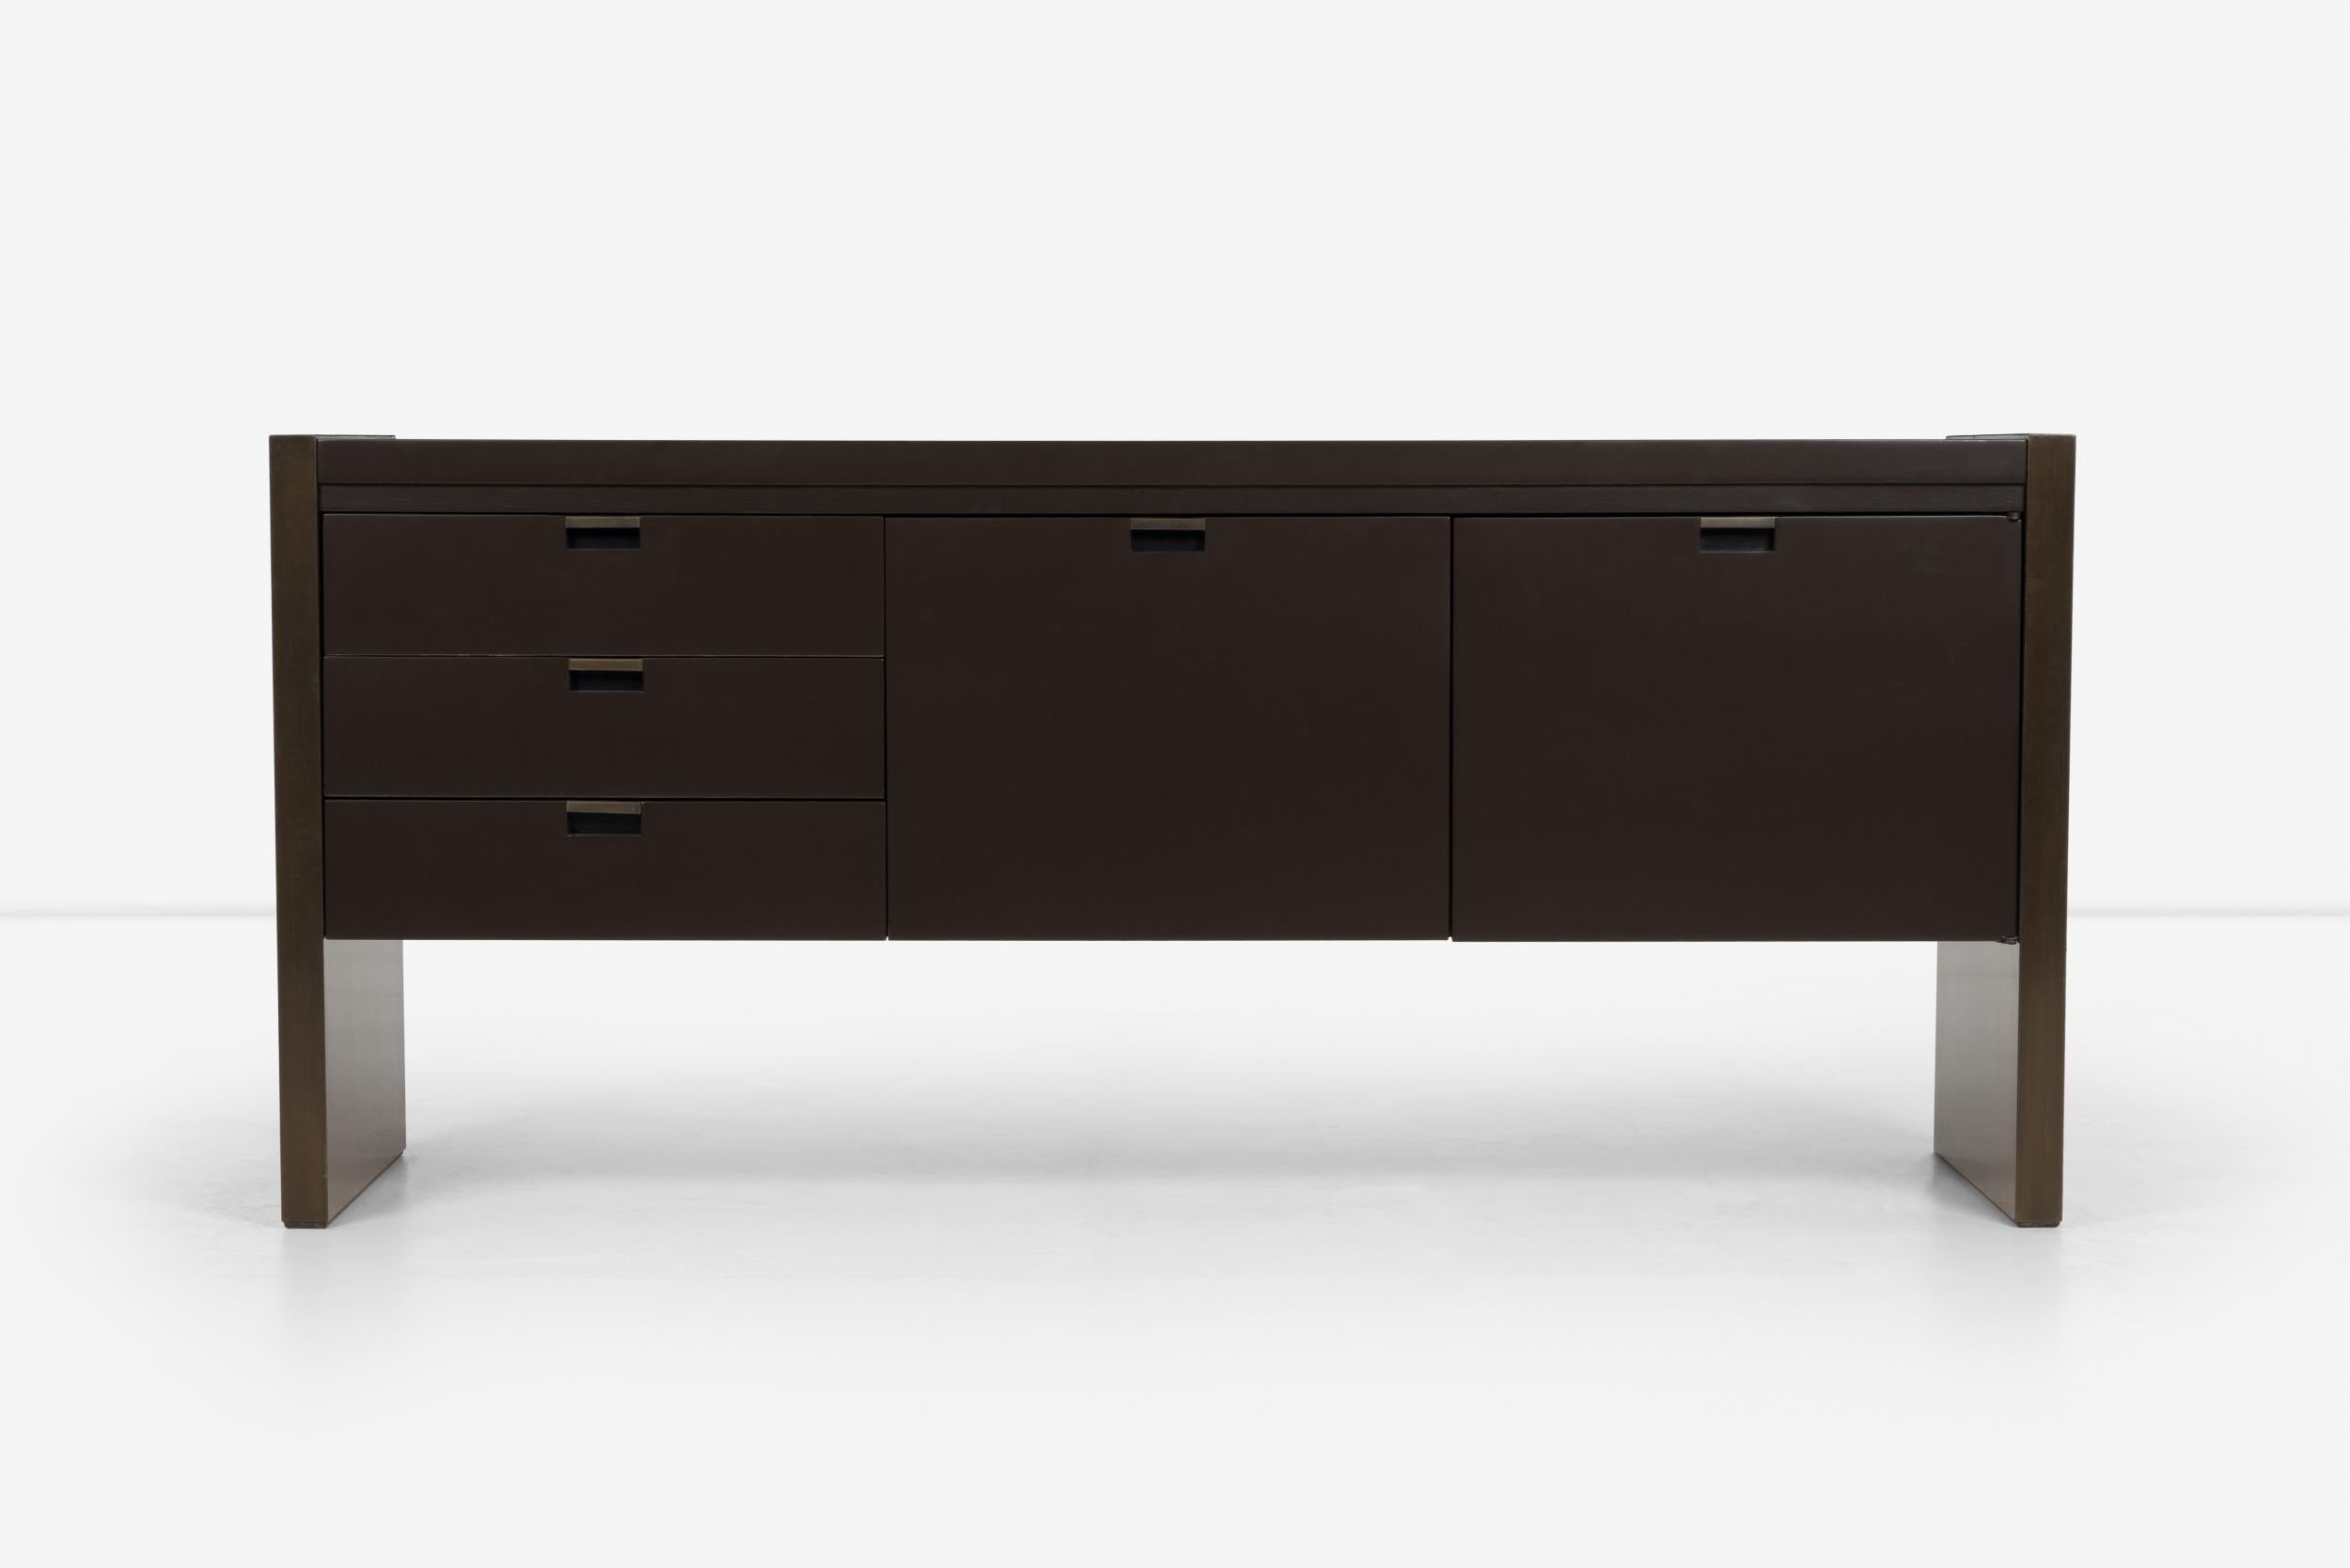 Roger Sprunger for Dunbar credenza, bronze sides with two file drawers and 3 pencil drawers.
(Dunbar label inside drawer).